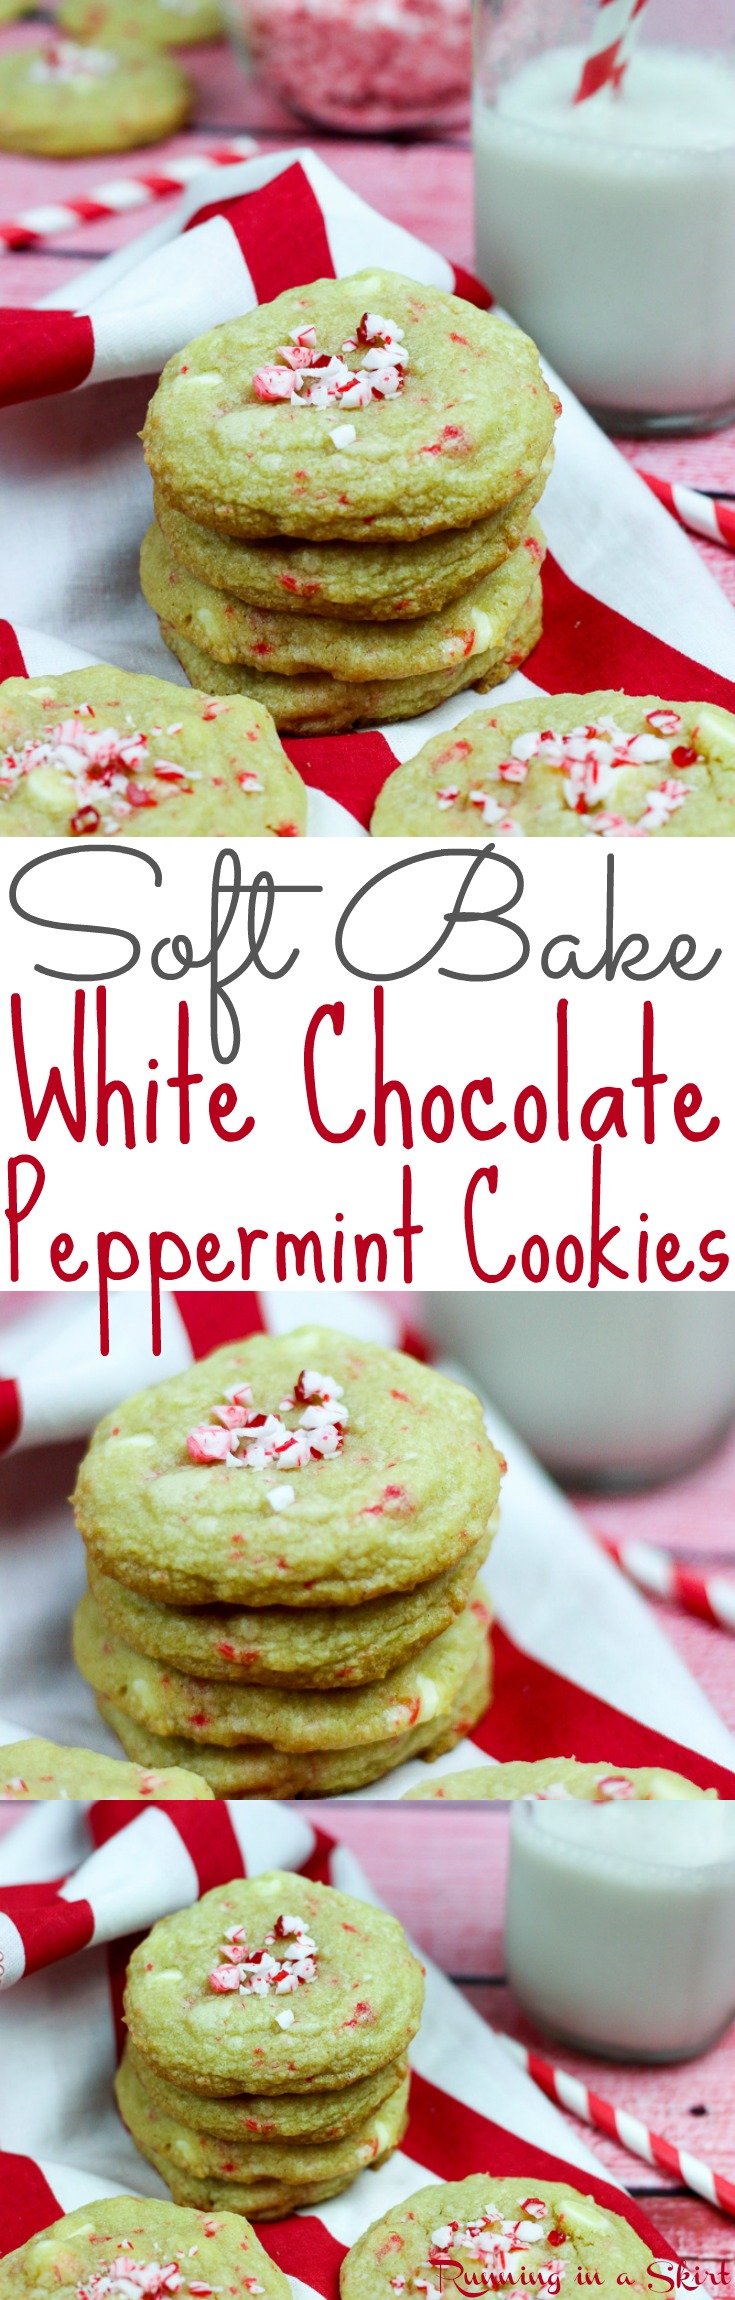 Simple, Soft Bake White Chocolate Peppermint Cookies recipe. This easy desserts recipe is chewy and delicious... the perfect holiday foods. Your families, friends and kids will love these. Made in a small batch for healthy portion control. / Running in a Skirt via @juliewunder